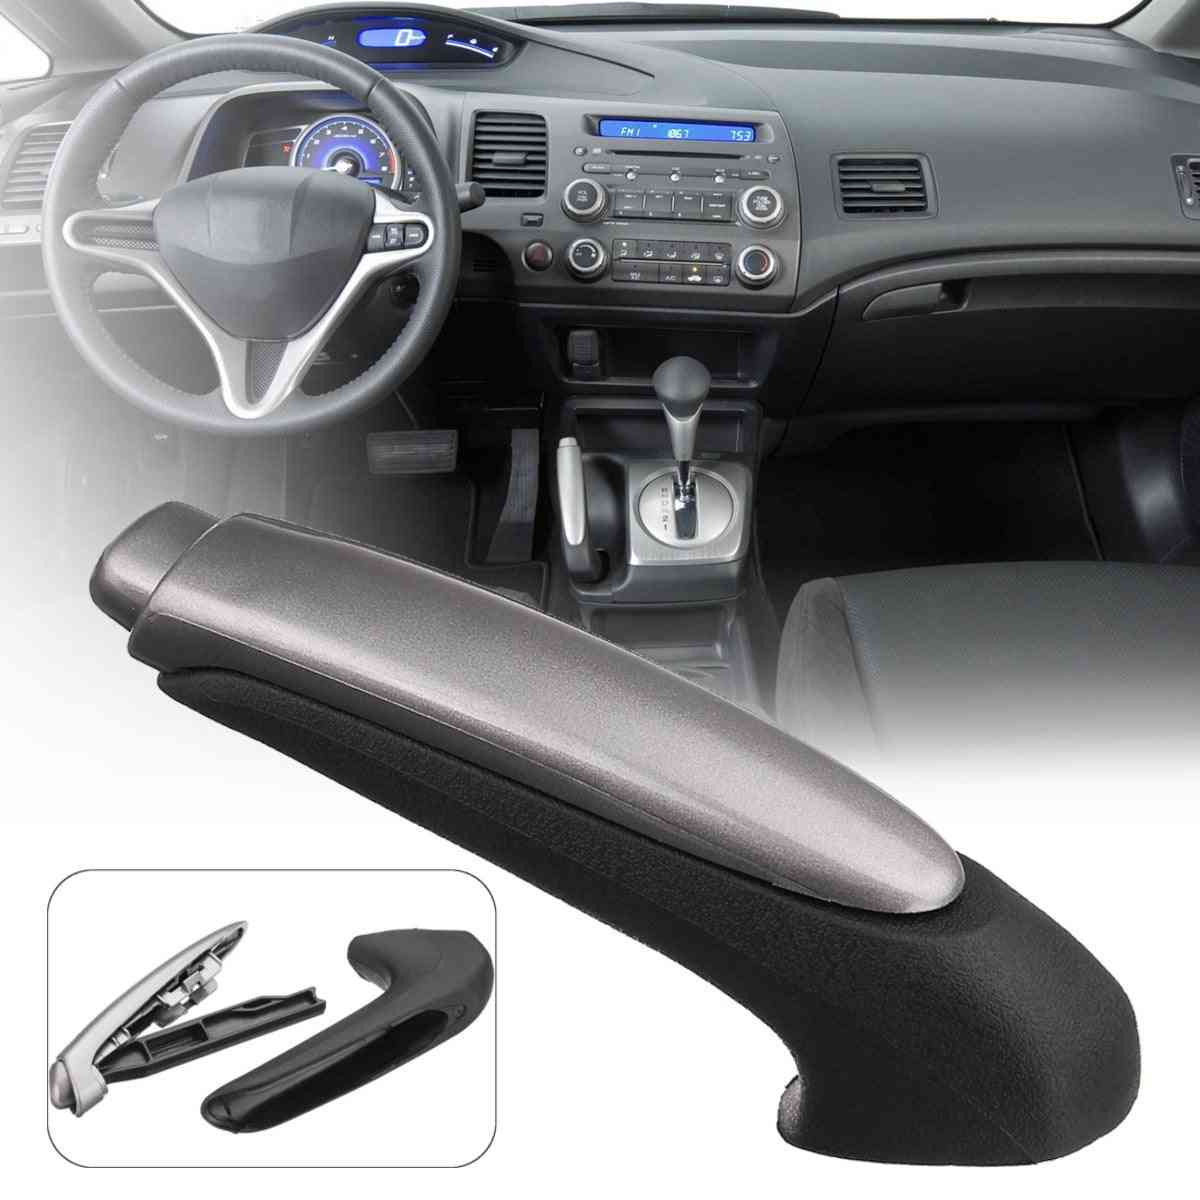 Car Handle Grip Covers Sleeve Protector Interior Accessories